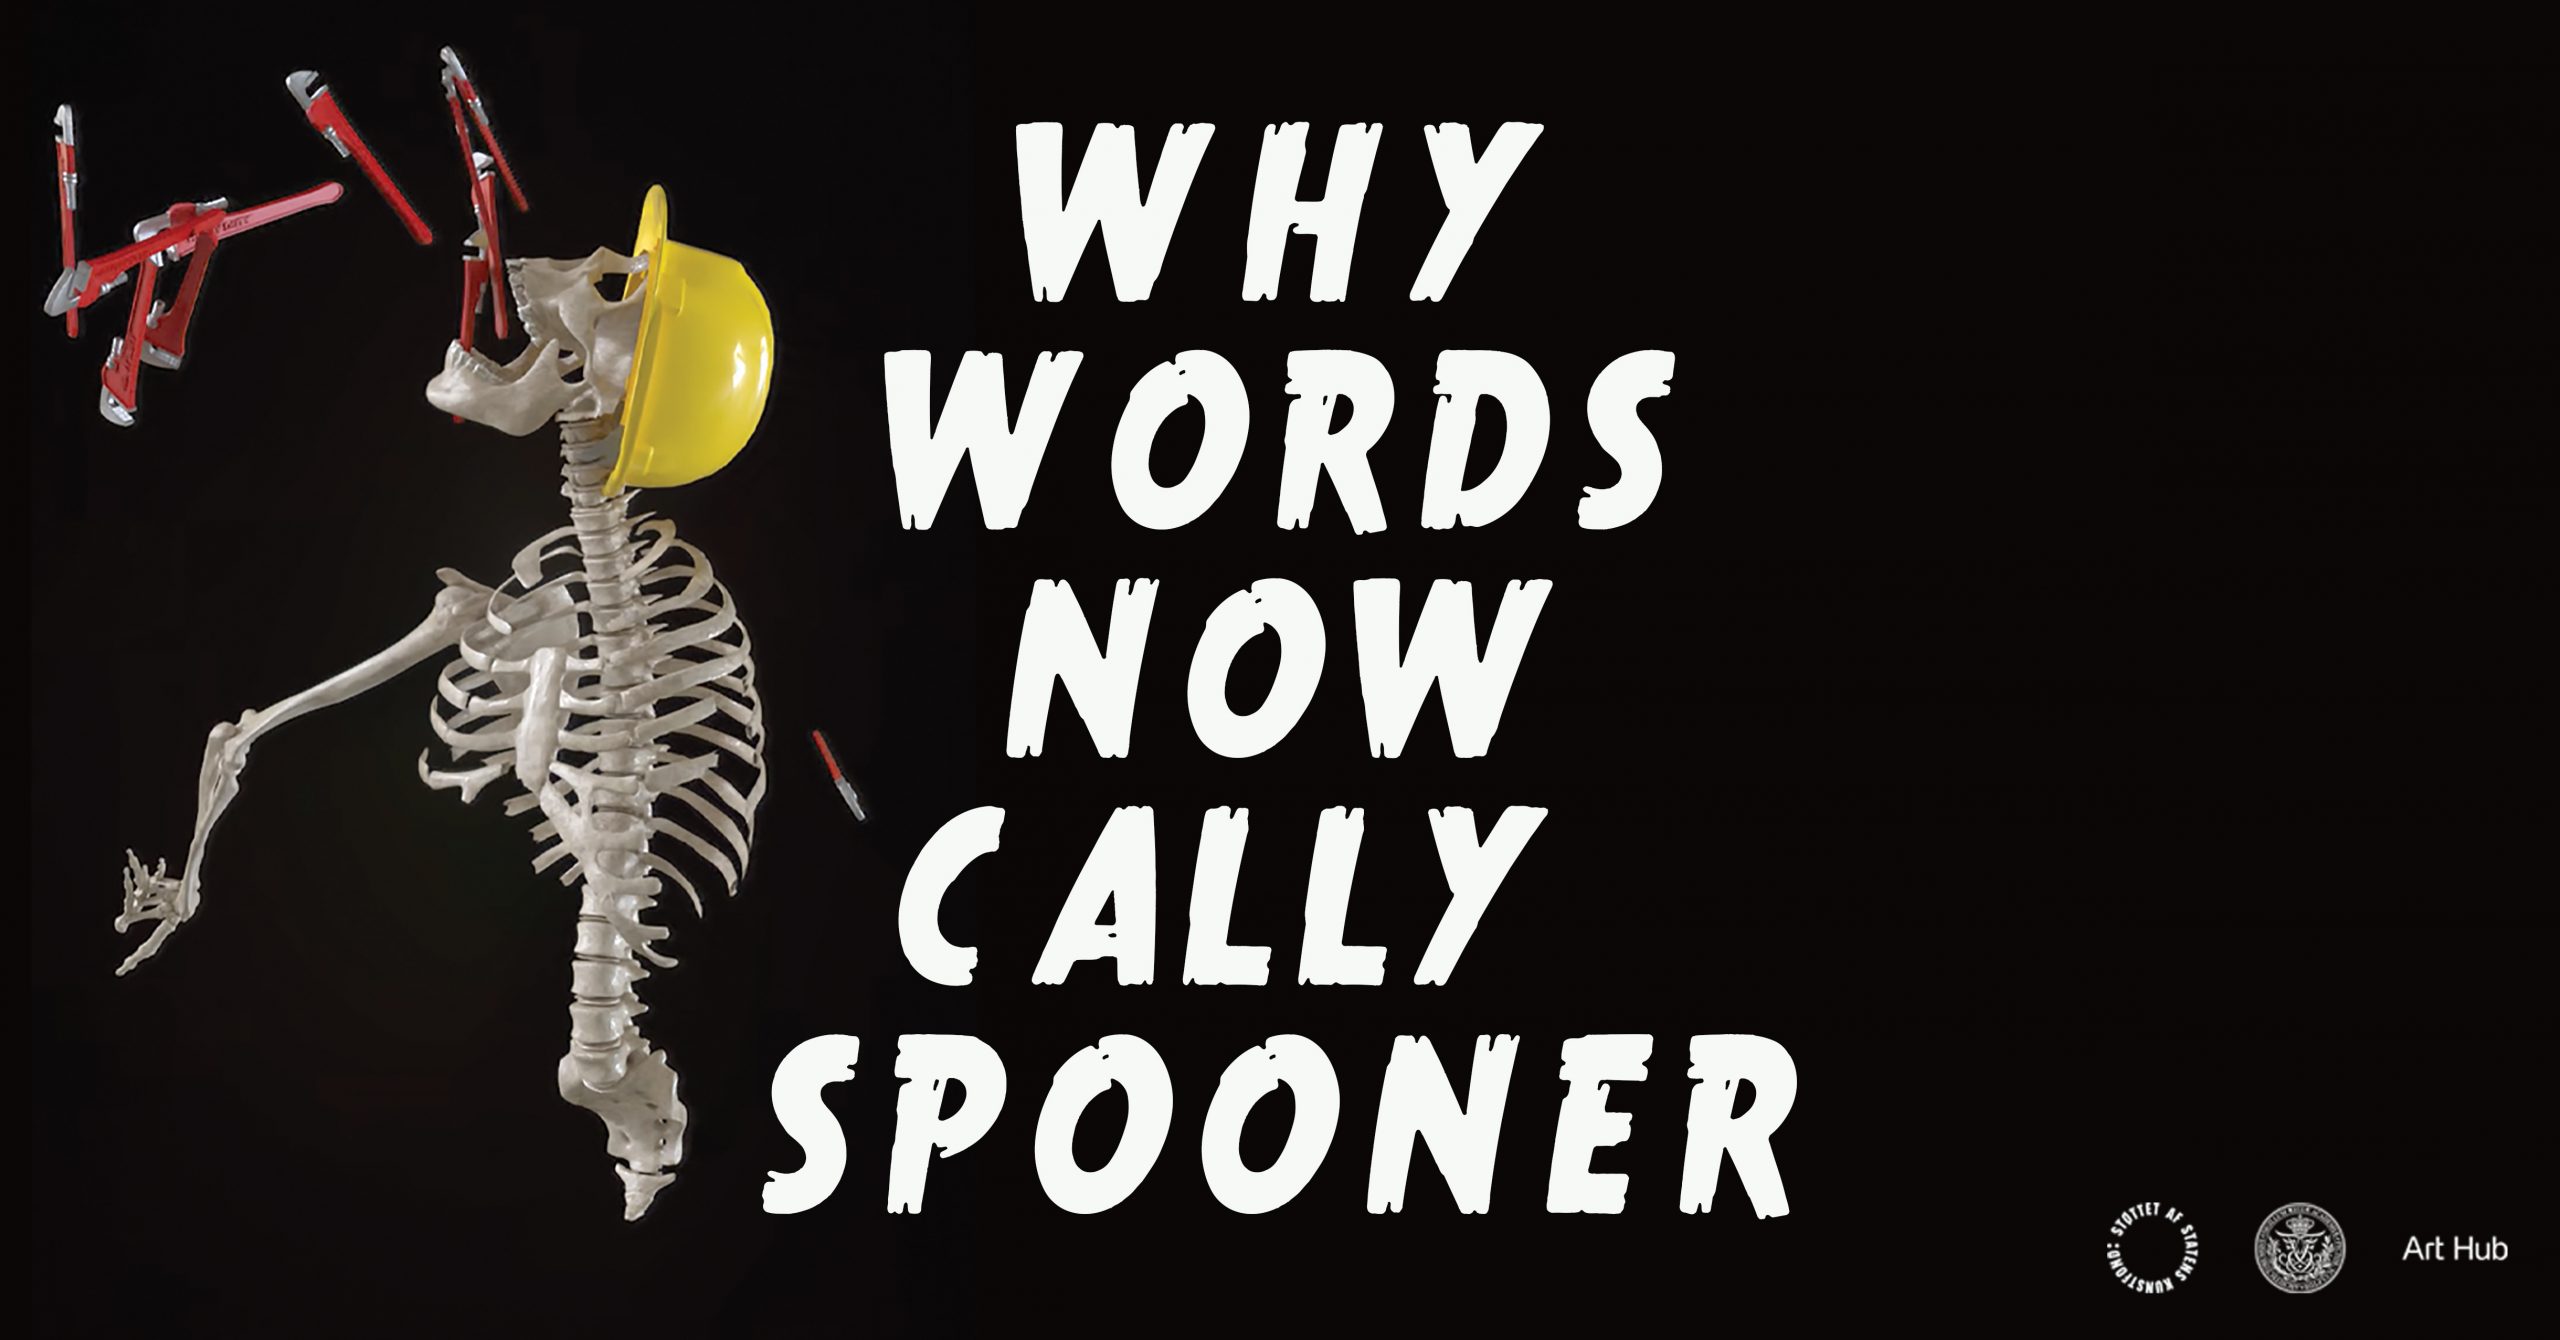 Why words now poster featuring Cally Spooner